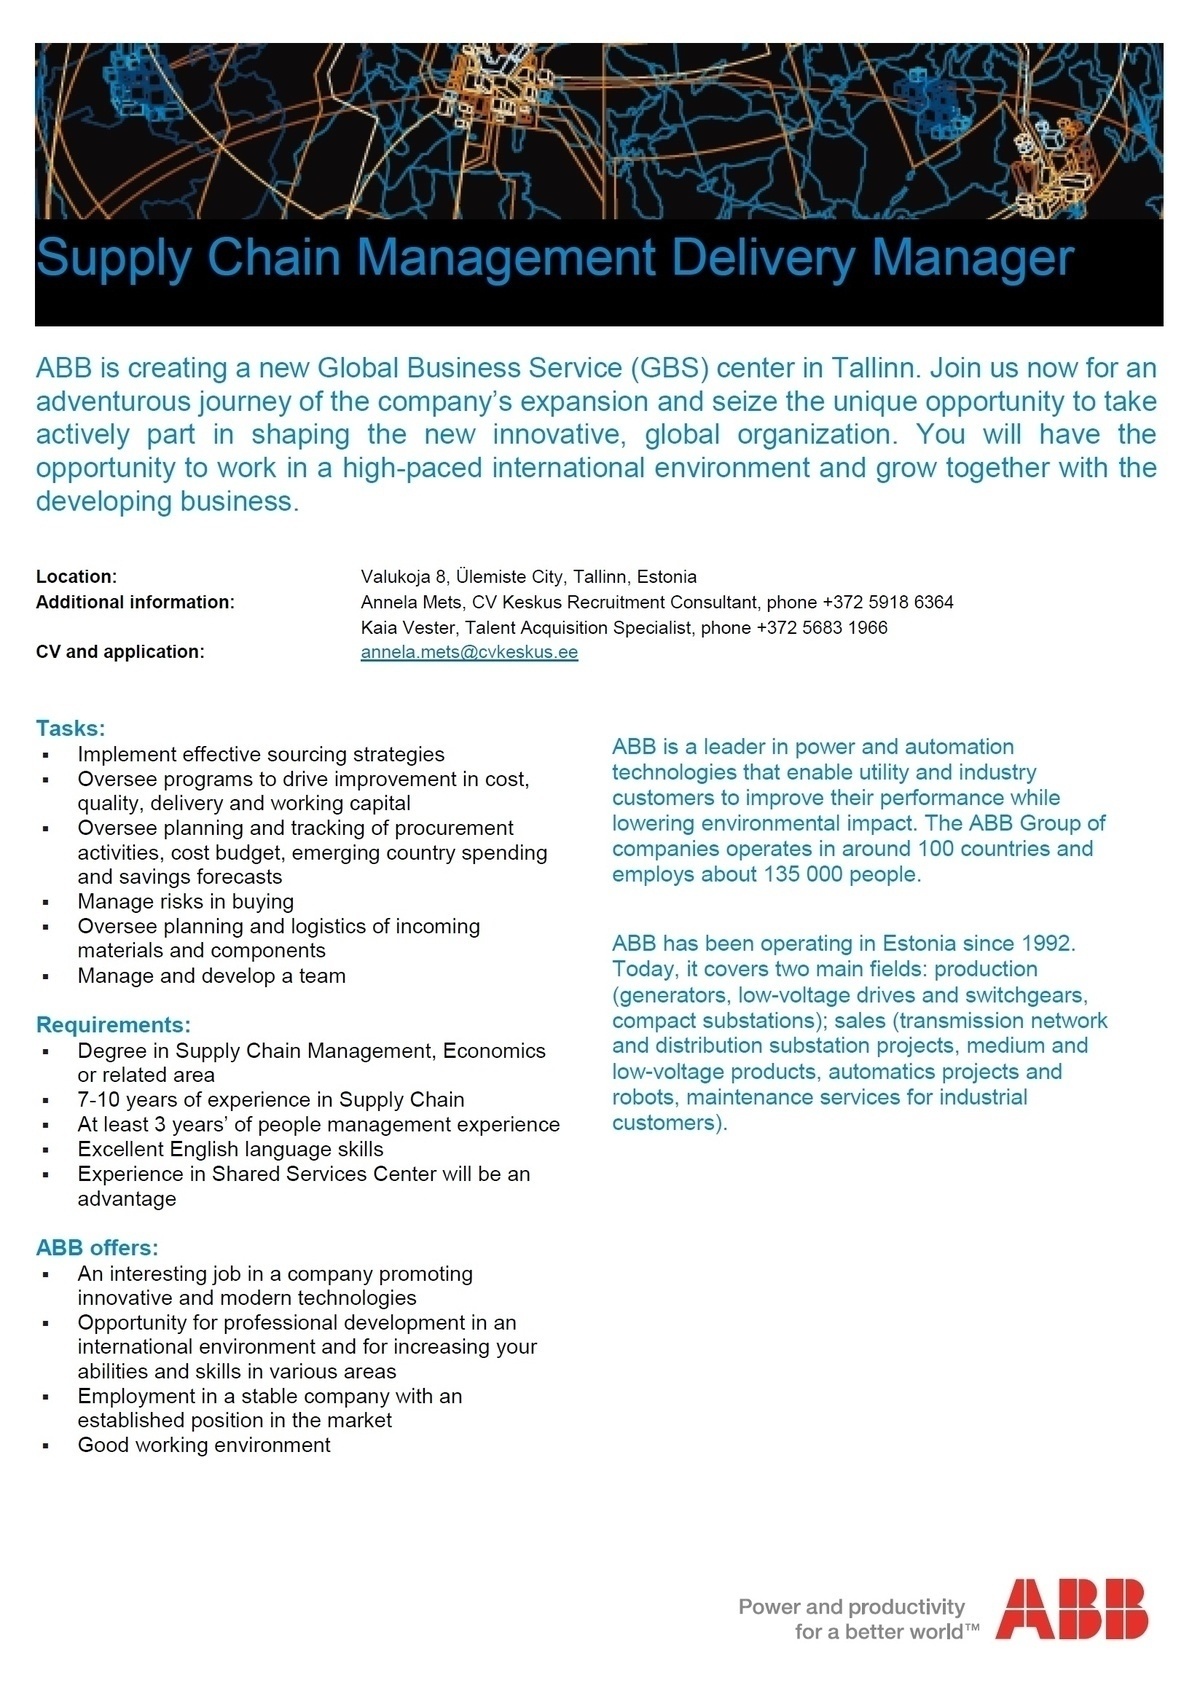 CV Keskus OÜ ABB is looking for a Supply Chain Management Delivery Manager